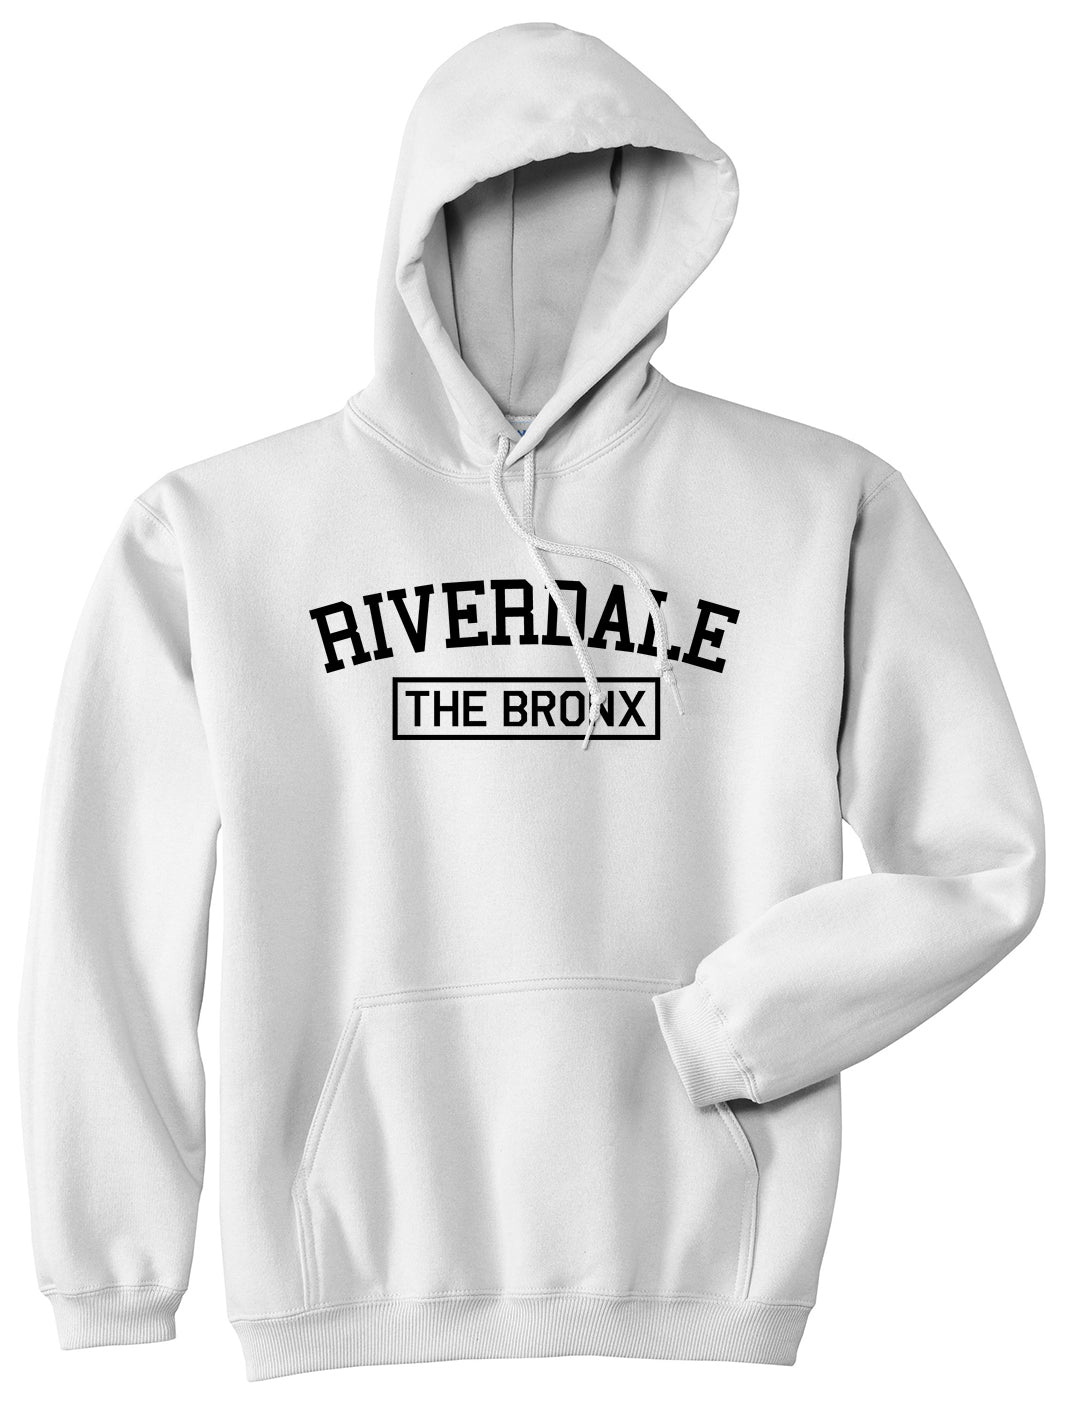 Riverdale The Bronx NY Mens Pullover Hoodie White